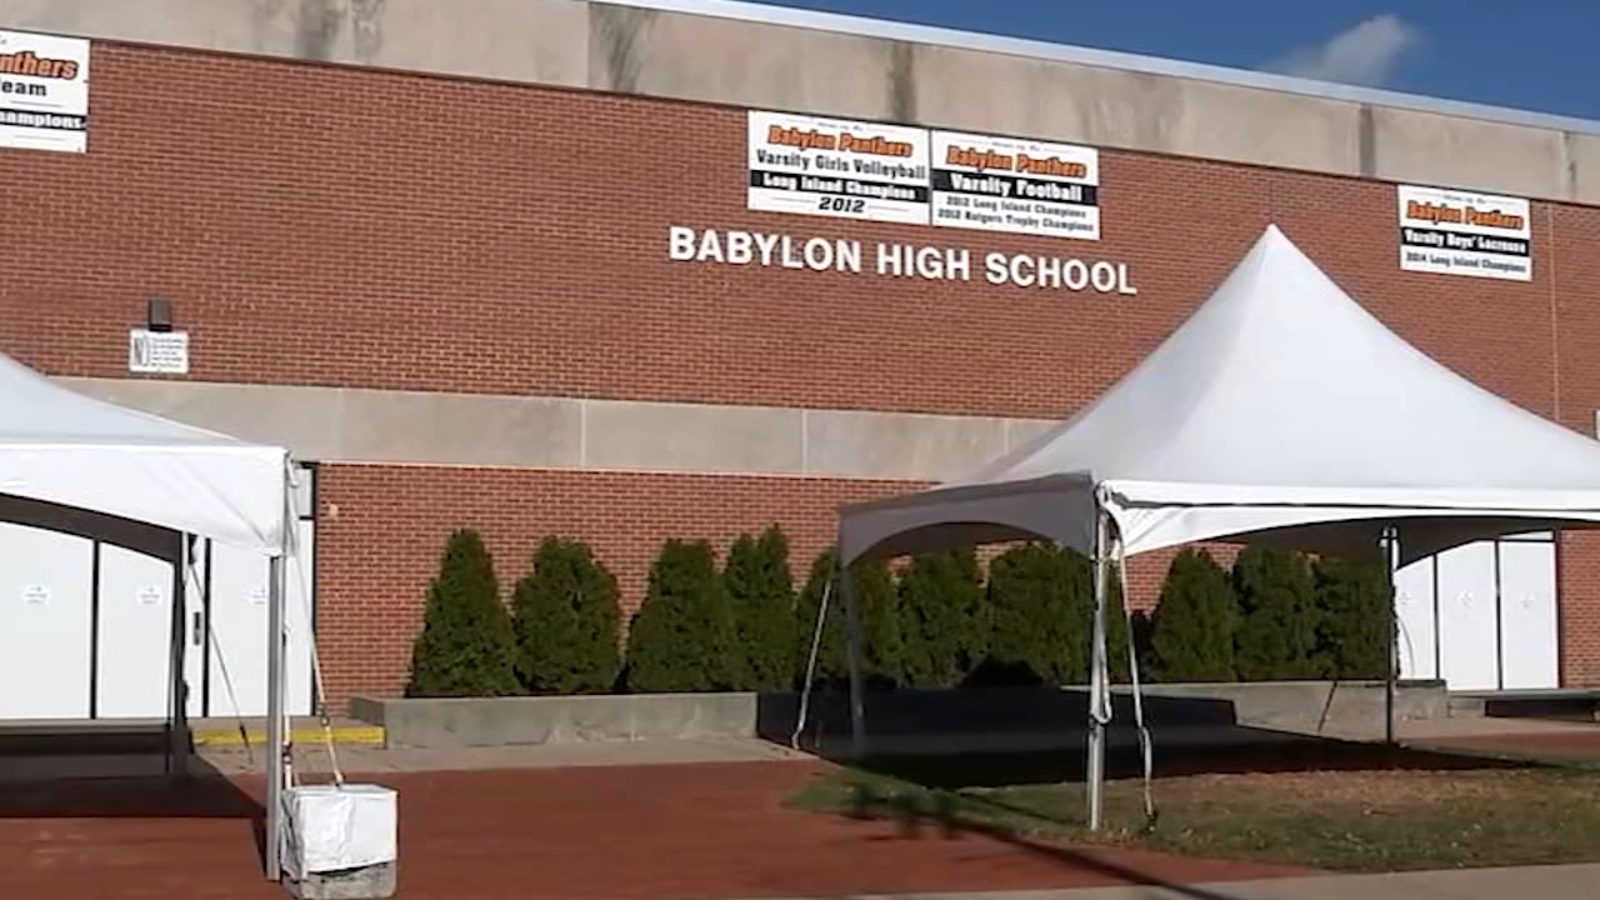 More than 80 students sick with suspected norovirus at Babylon High School